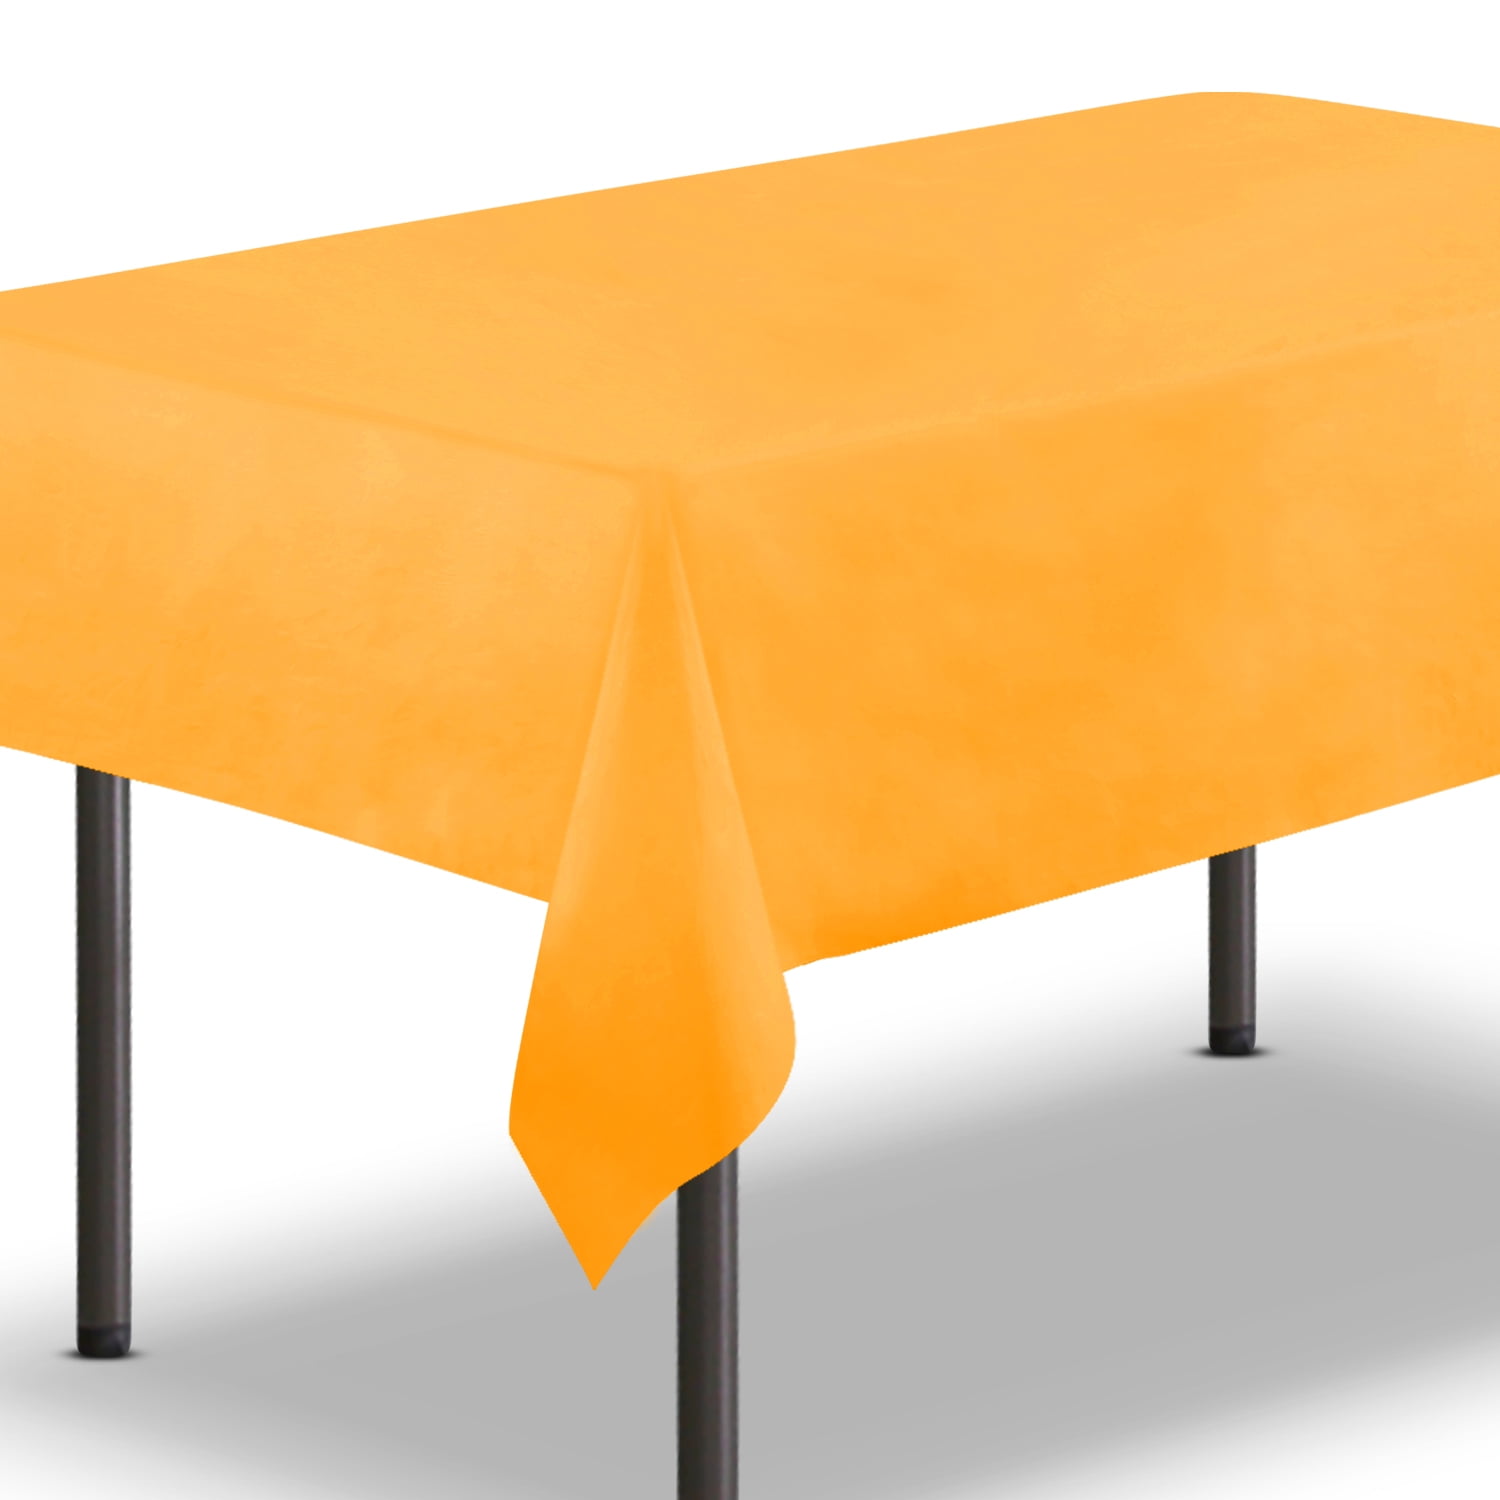 Orange Plastic Tablecloths 3 Pack Disposable Table Covers 54 x 108 Inch Table Cloths Vinyl Tablecovers for Round Tables up to 8 ft and for Picnic Barbecue Birthday Wedding Anniversary Banquet 